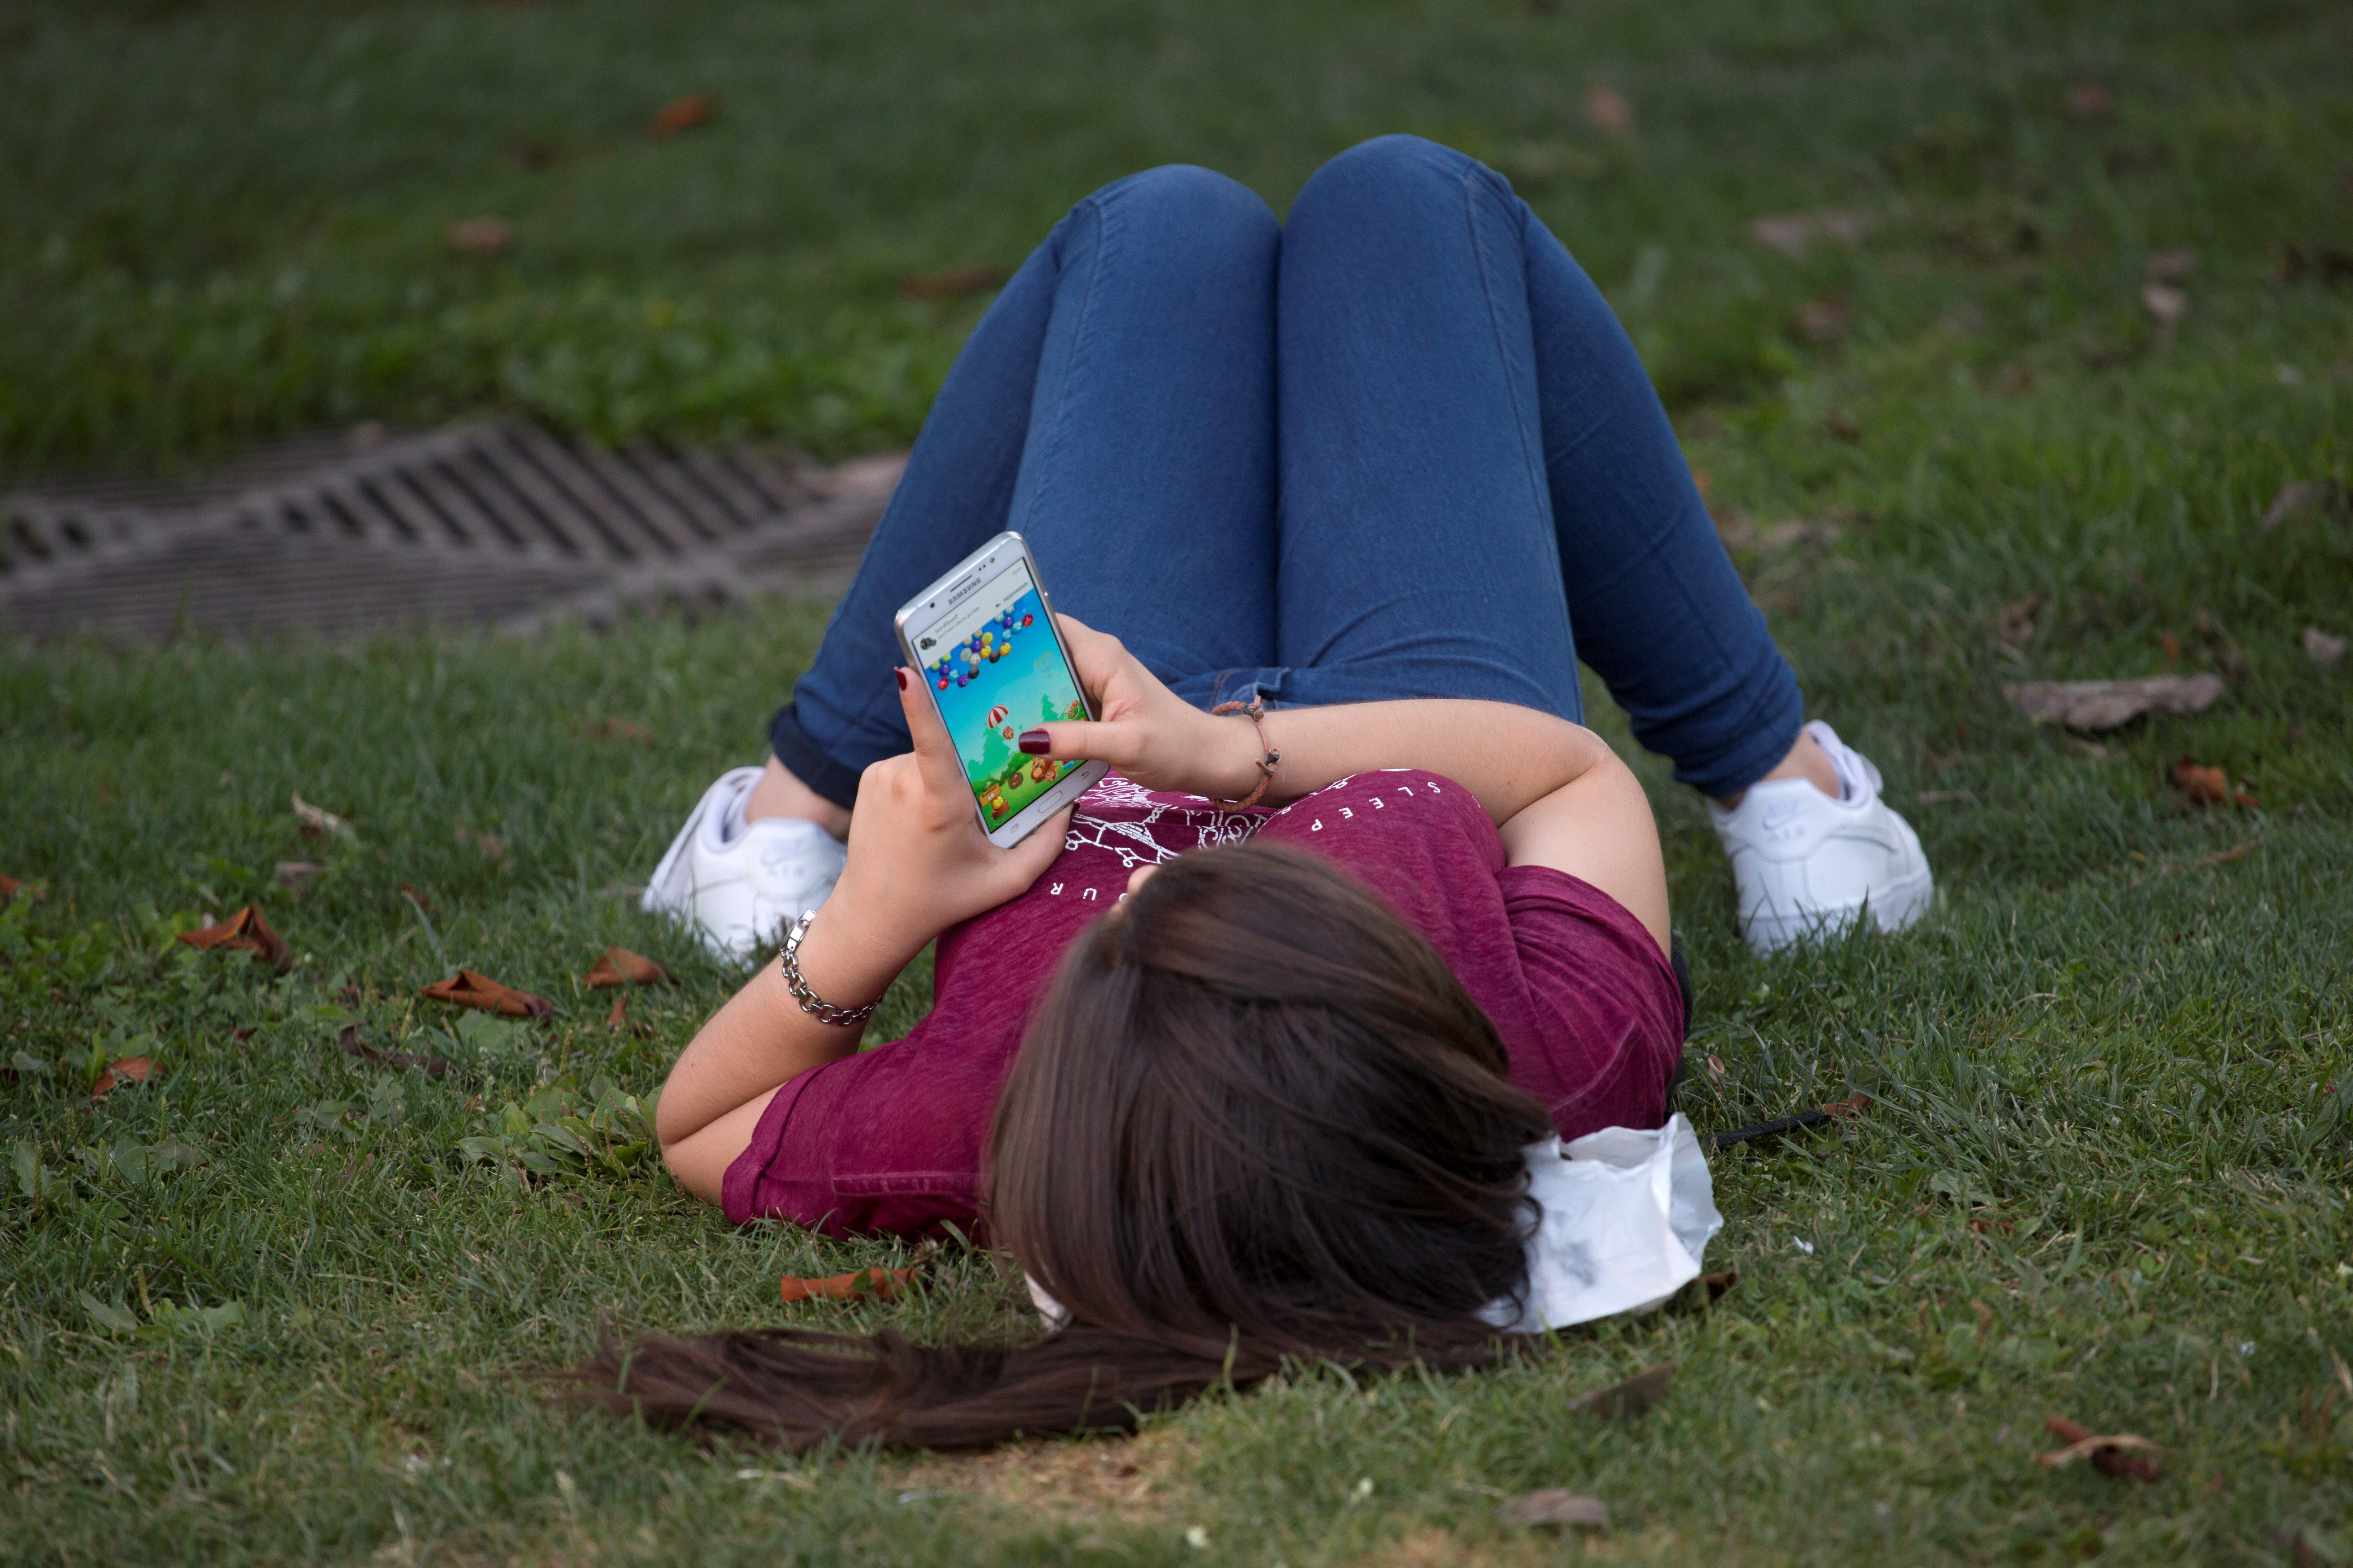 A woman plays a game on her cell phone while lying on the grass in Madrid